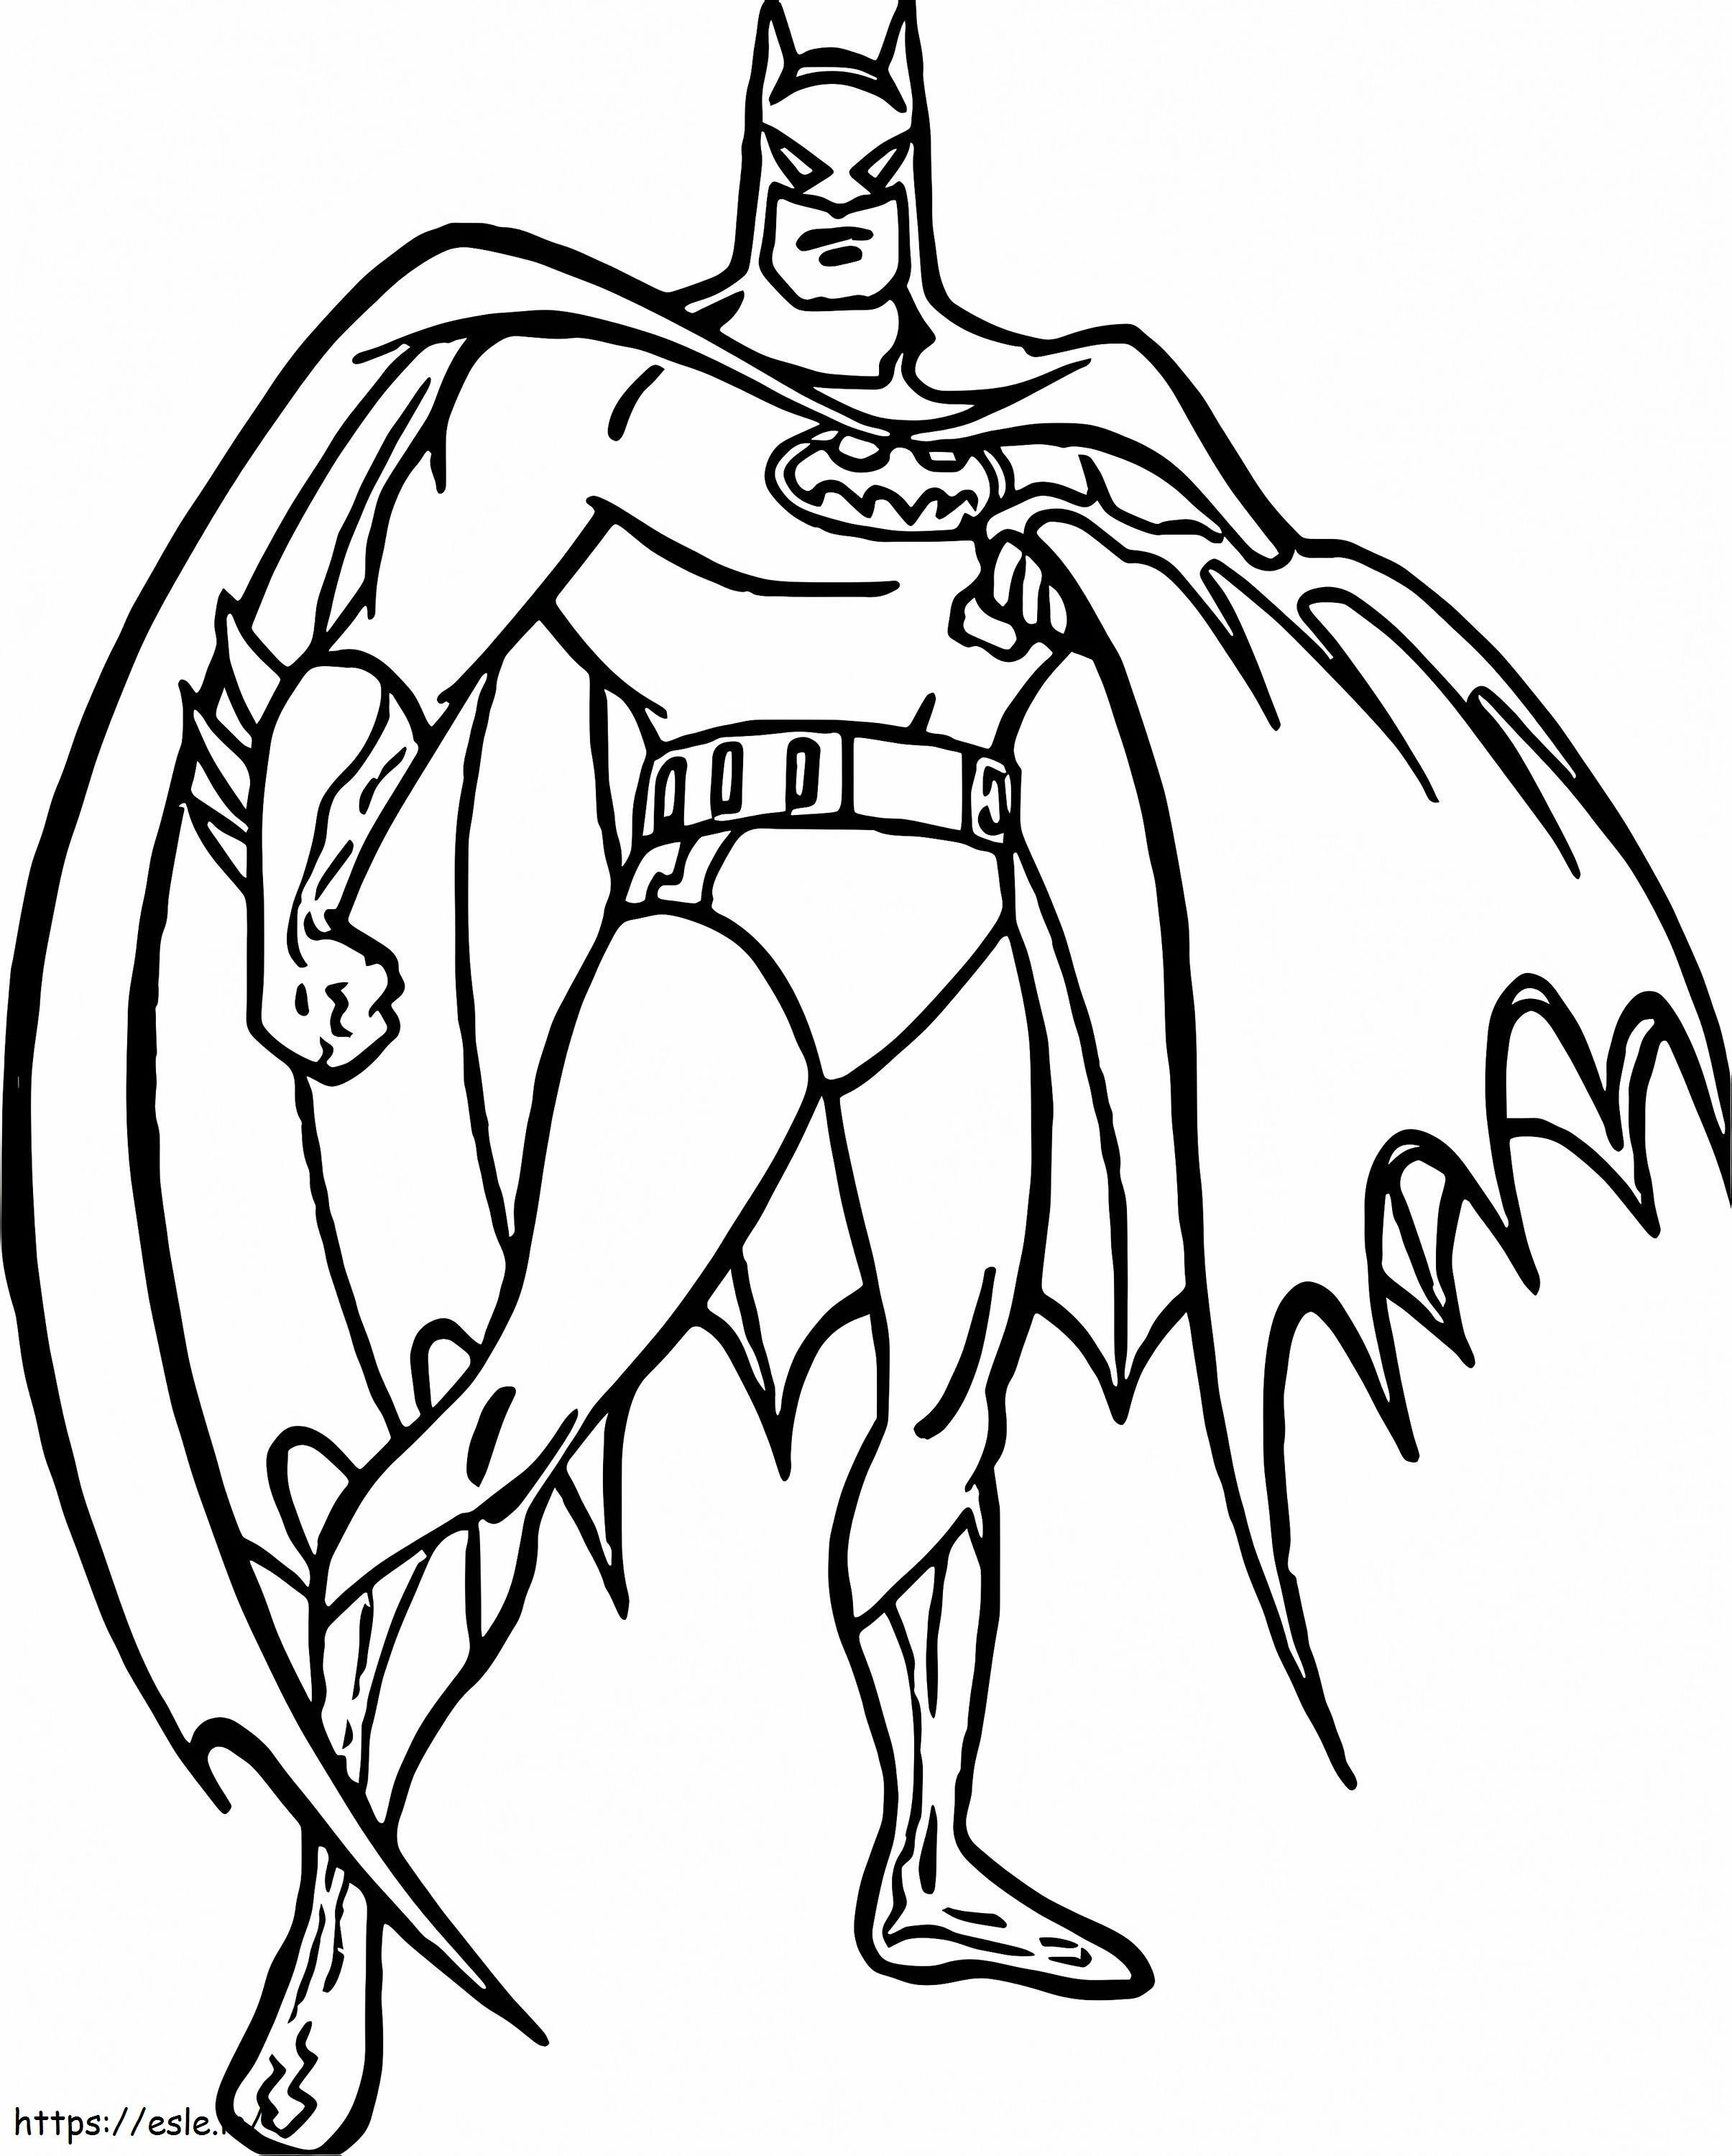 Superman And Batman Coloring Book Ideatman Valentine Excelent Outline Pose Wecoloringpage Days Scaled Detective Comics Best Comic All Star Robin Art Books Incorporated First The coloring page